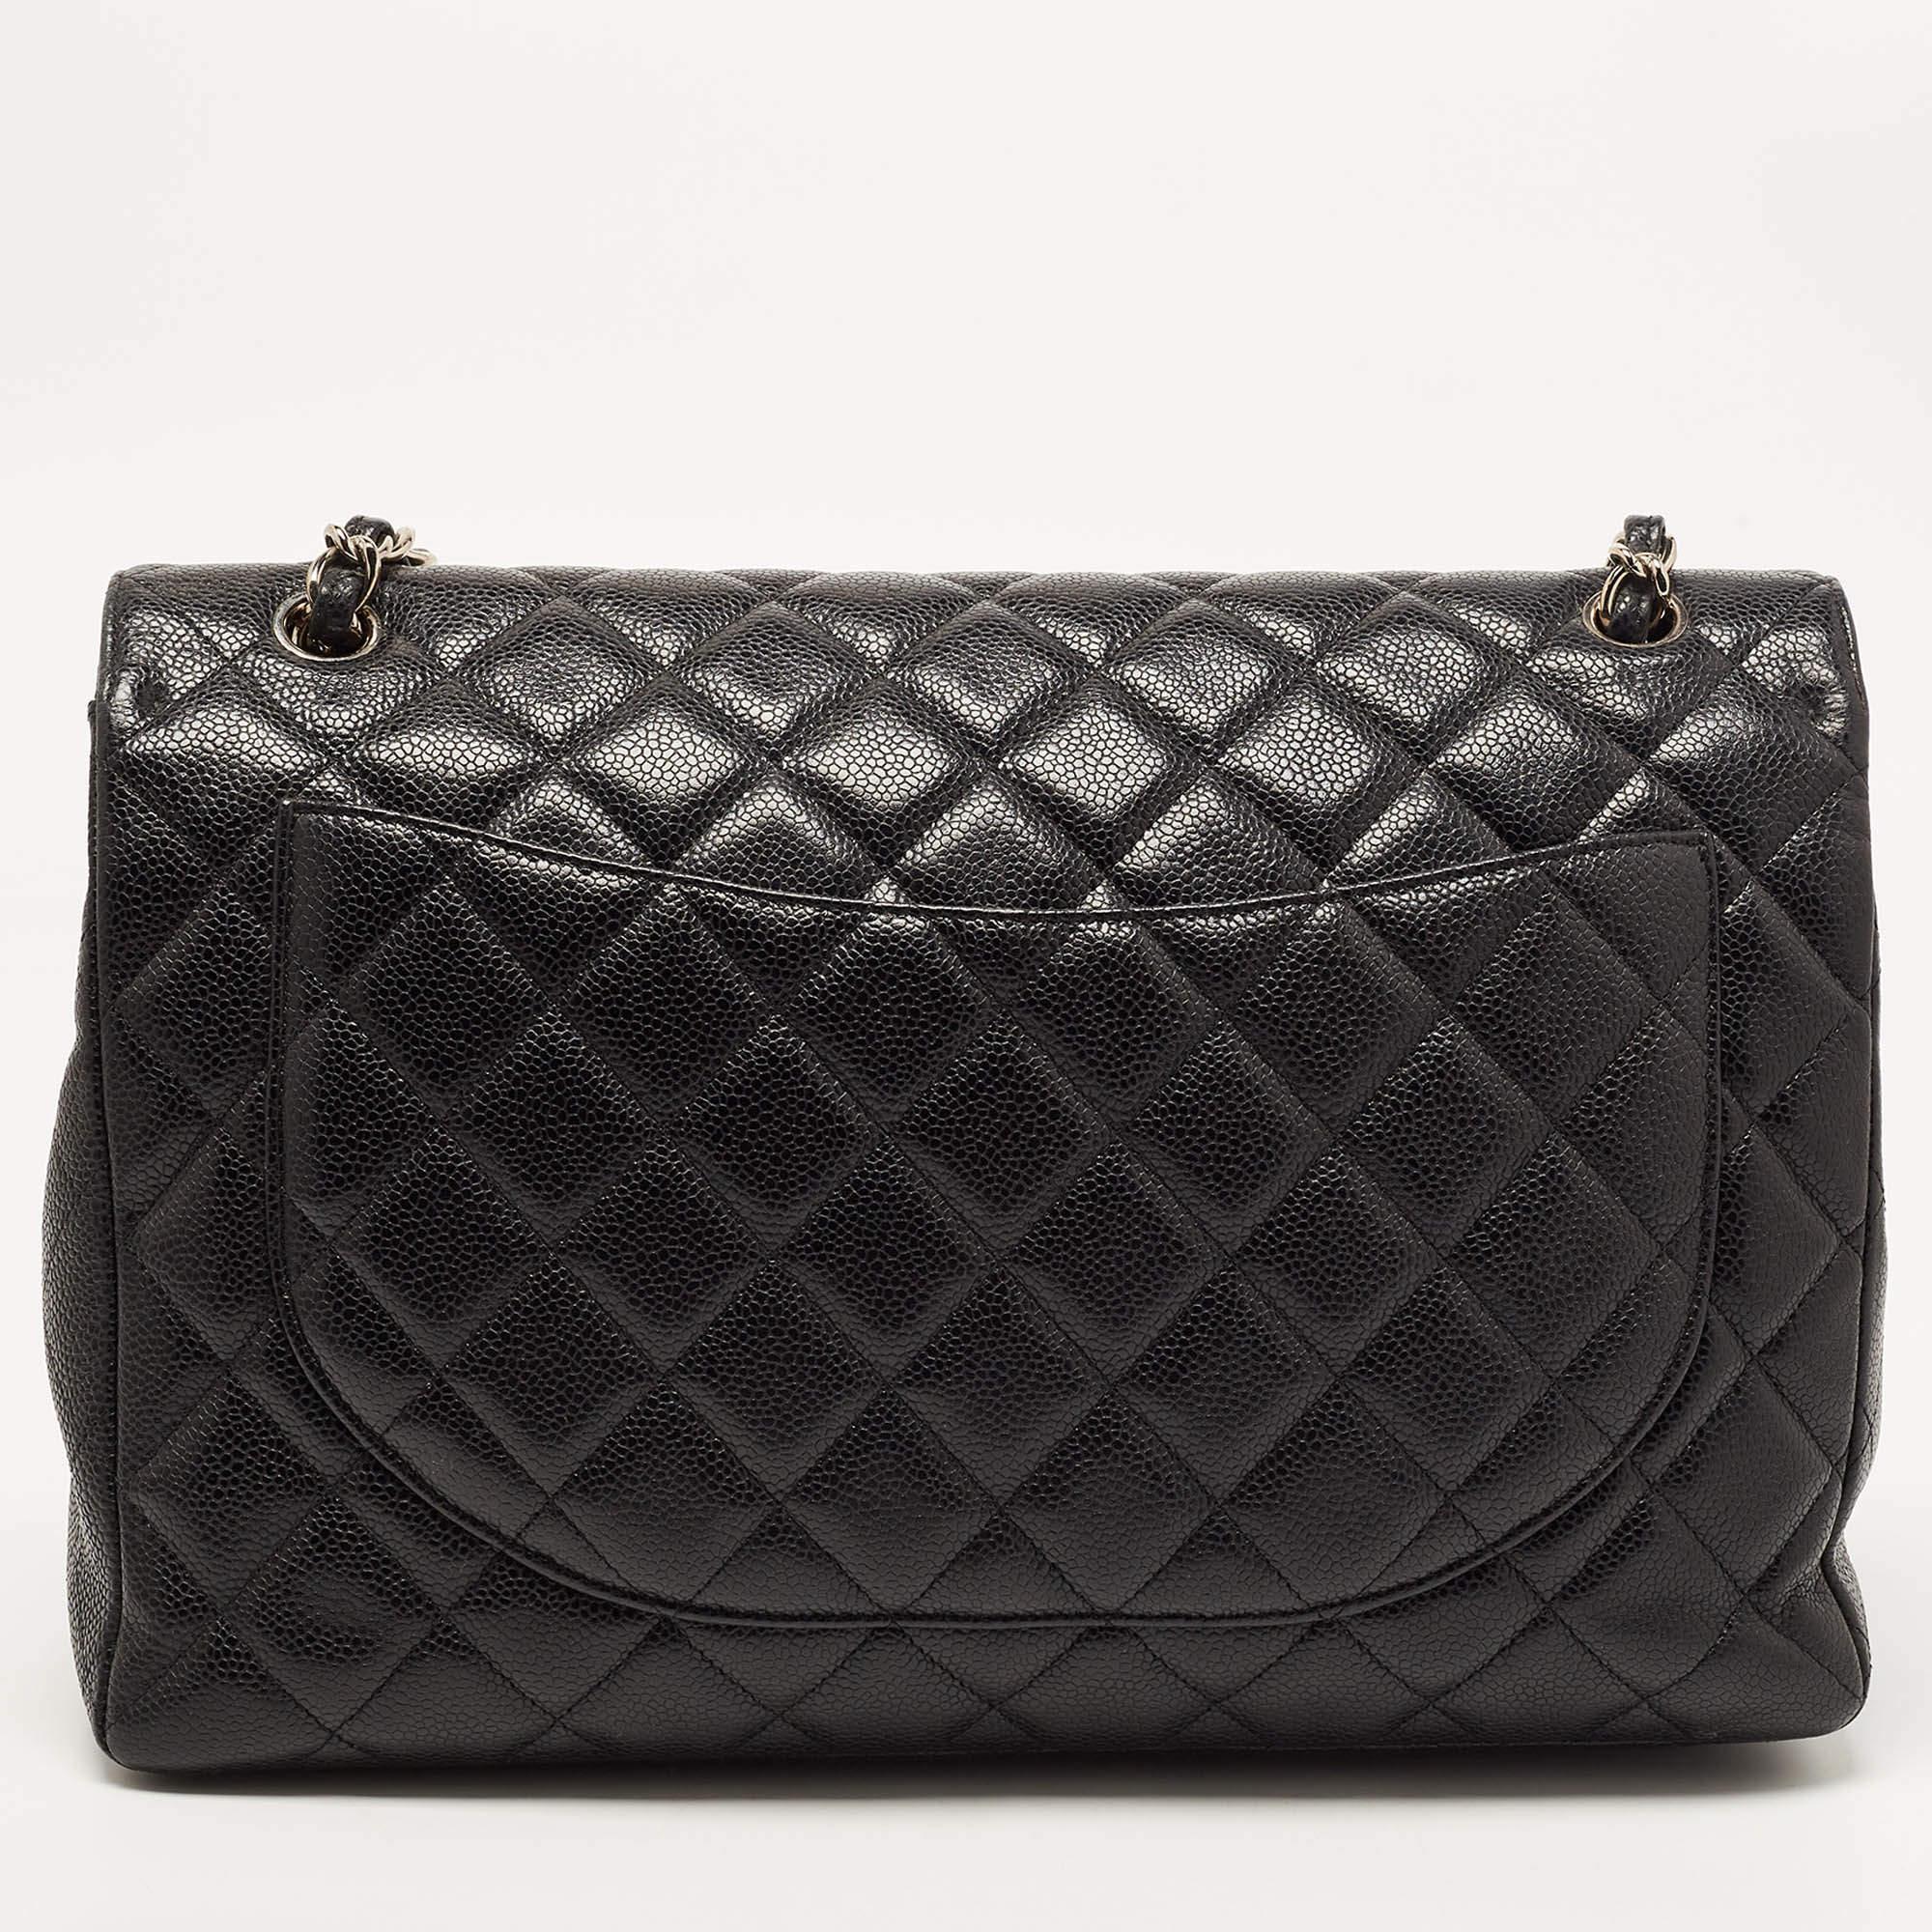 Chanel Black Quilted Caviar Leather Maxi Classic Single Flap Bag 2